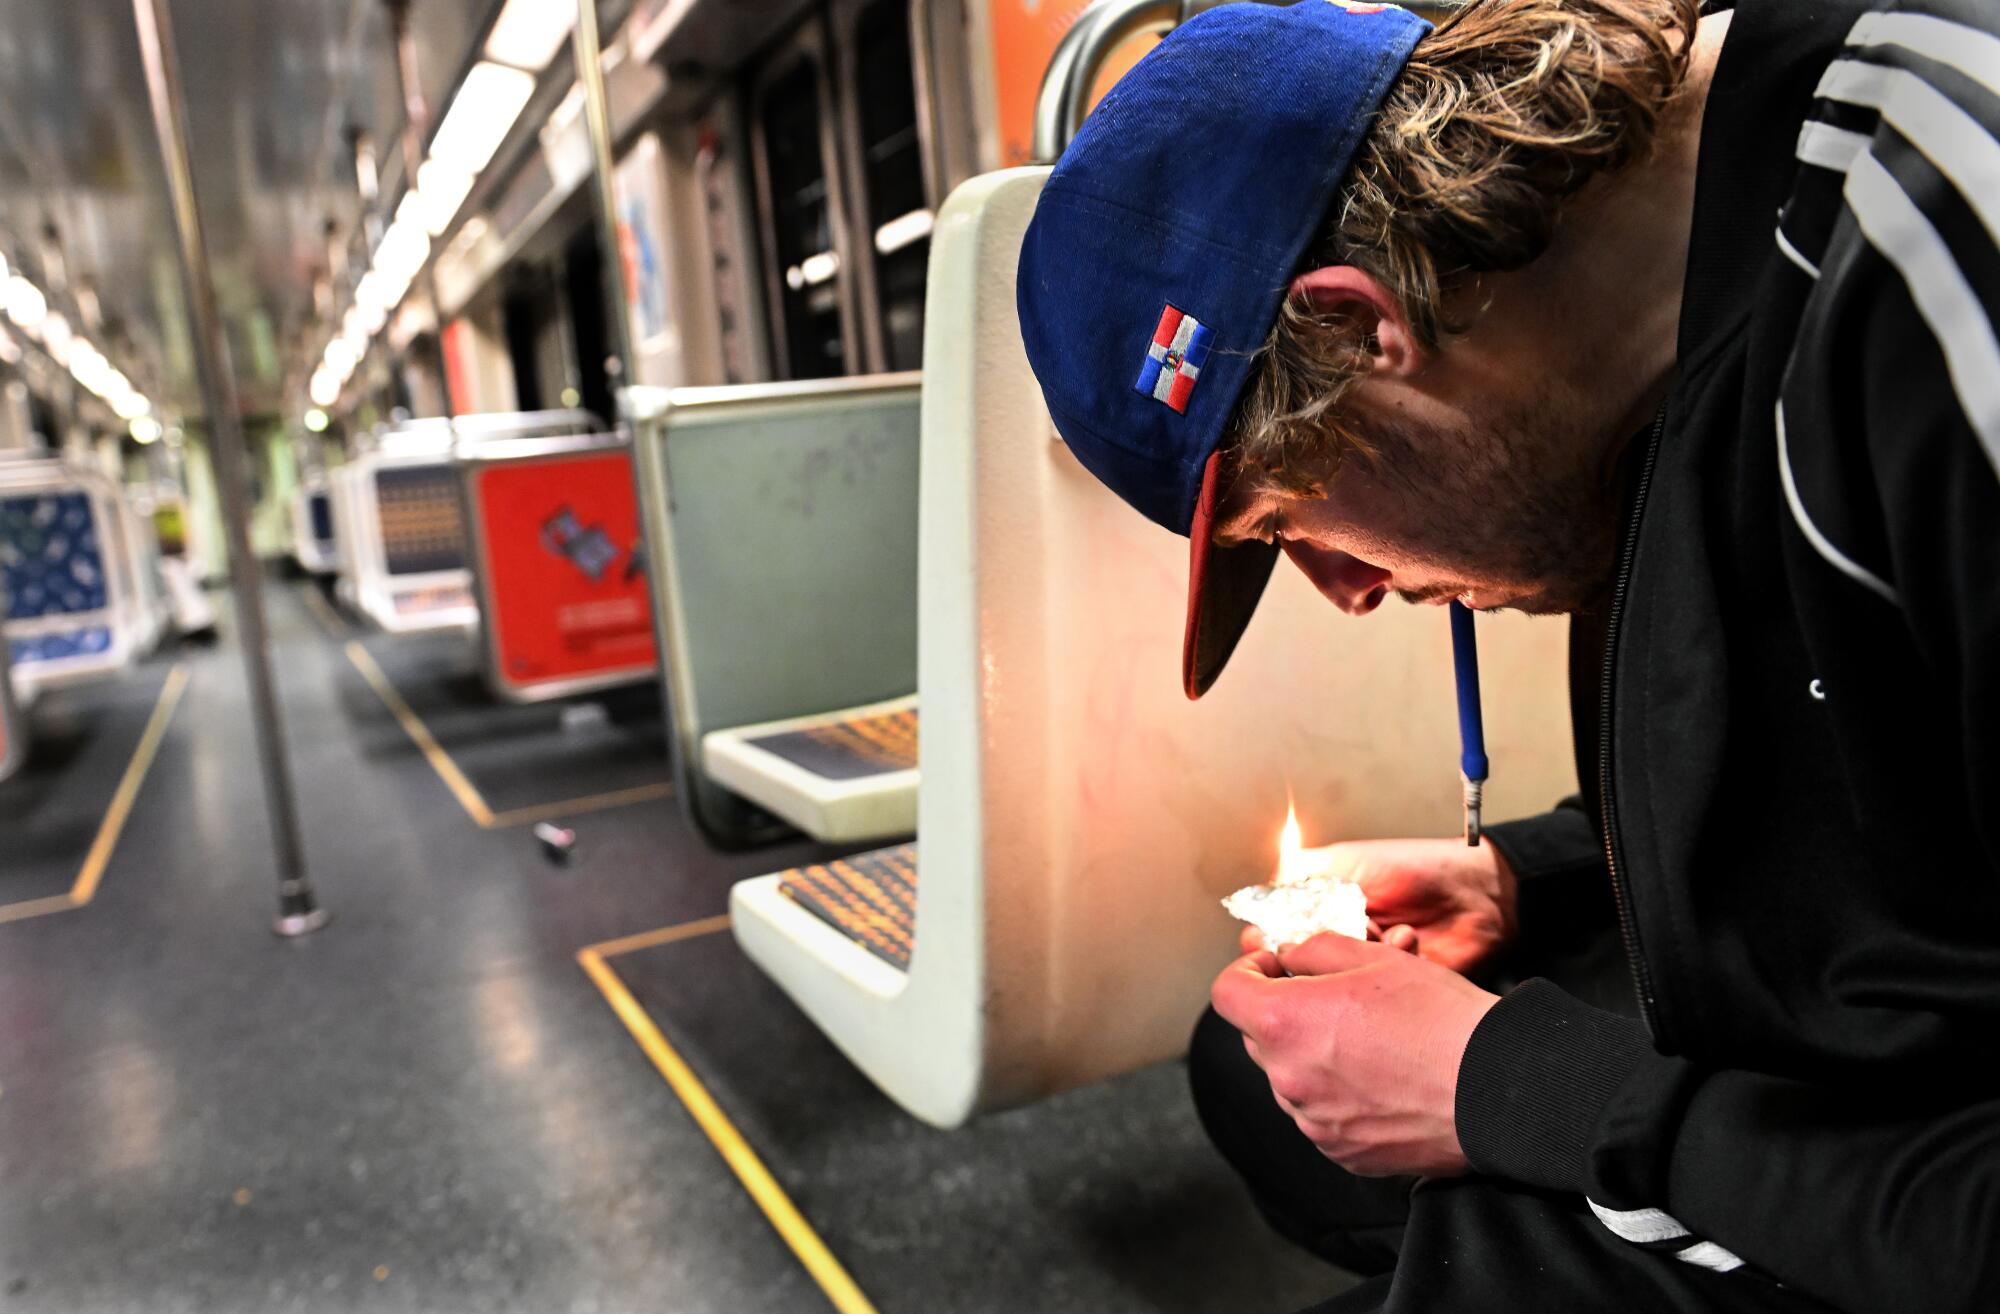 At right, seated on a subway train, a young man with dark blond hair and a baseball cap smokes fentanyl.